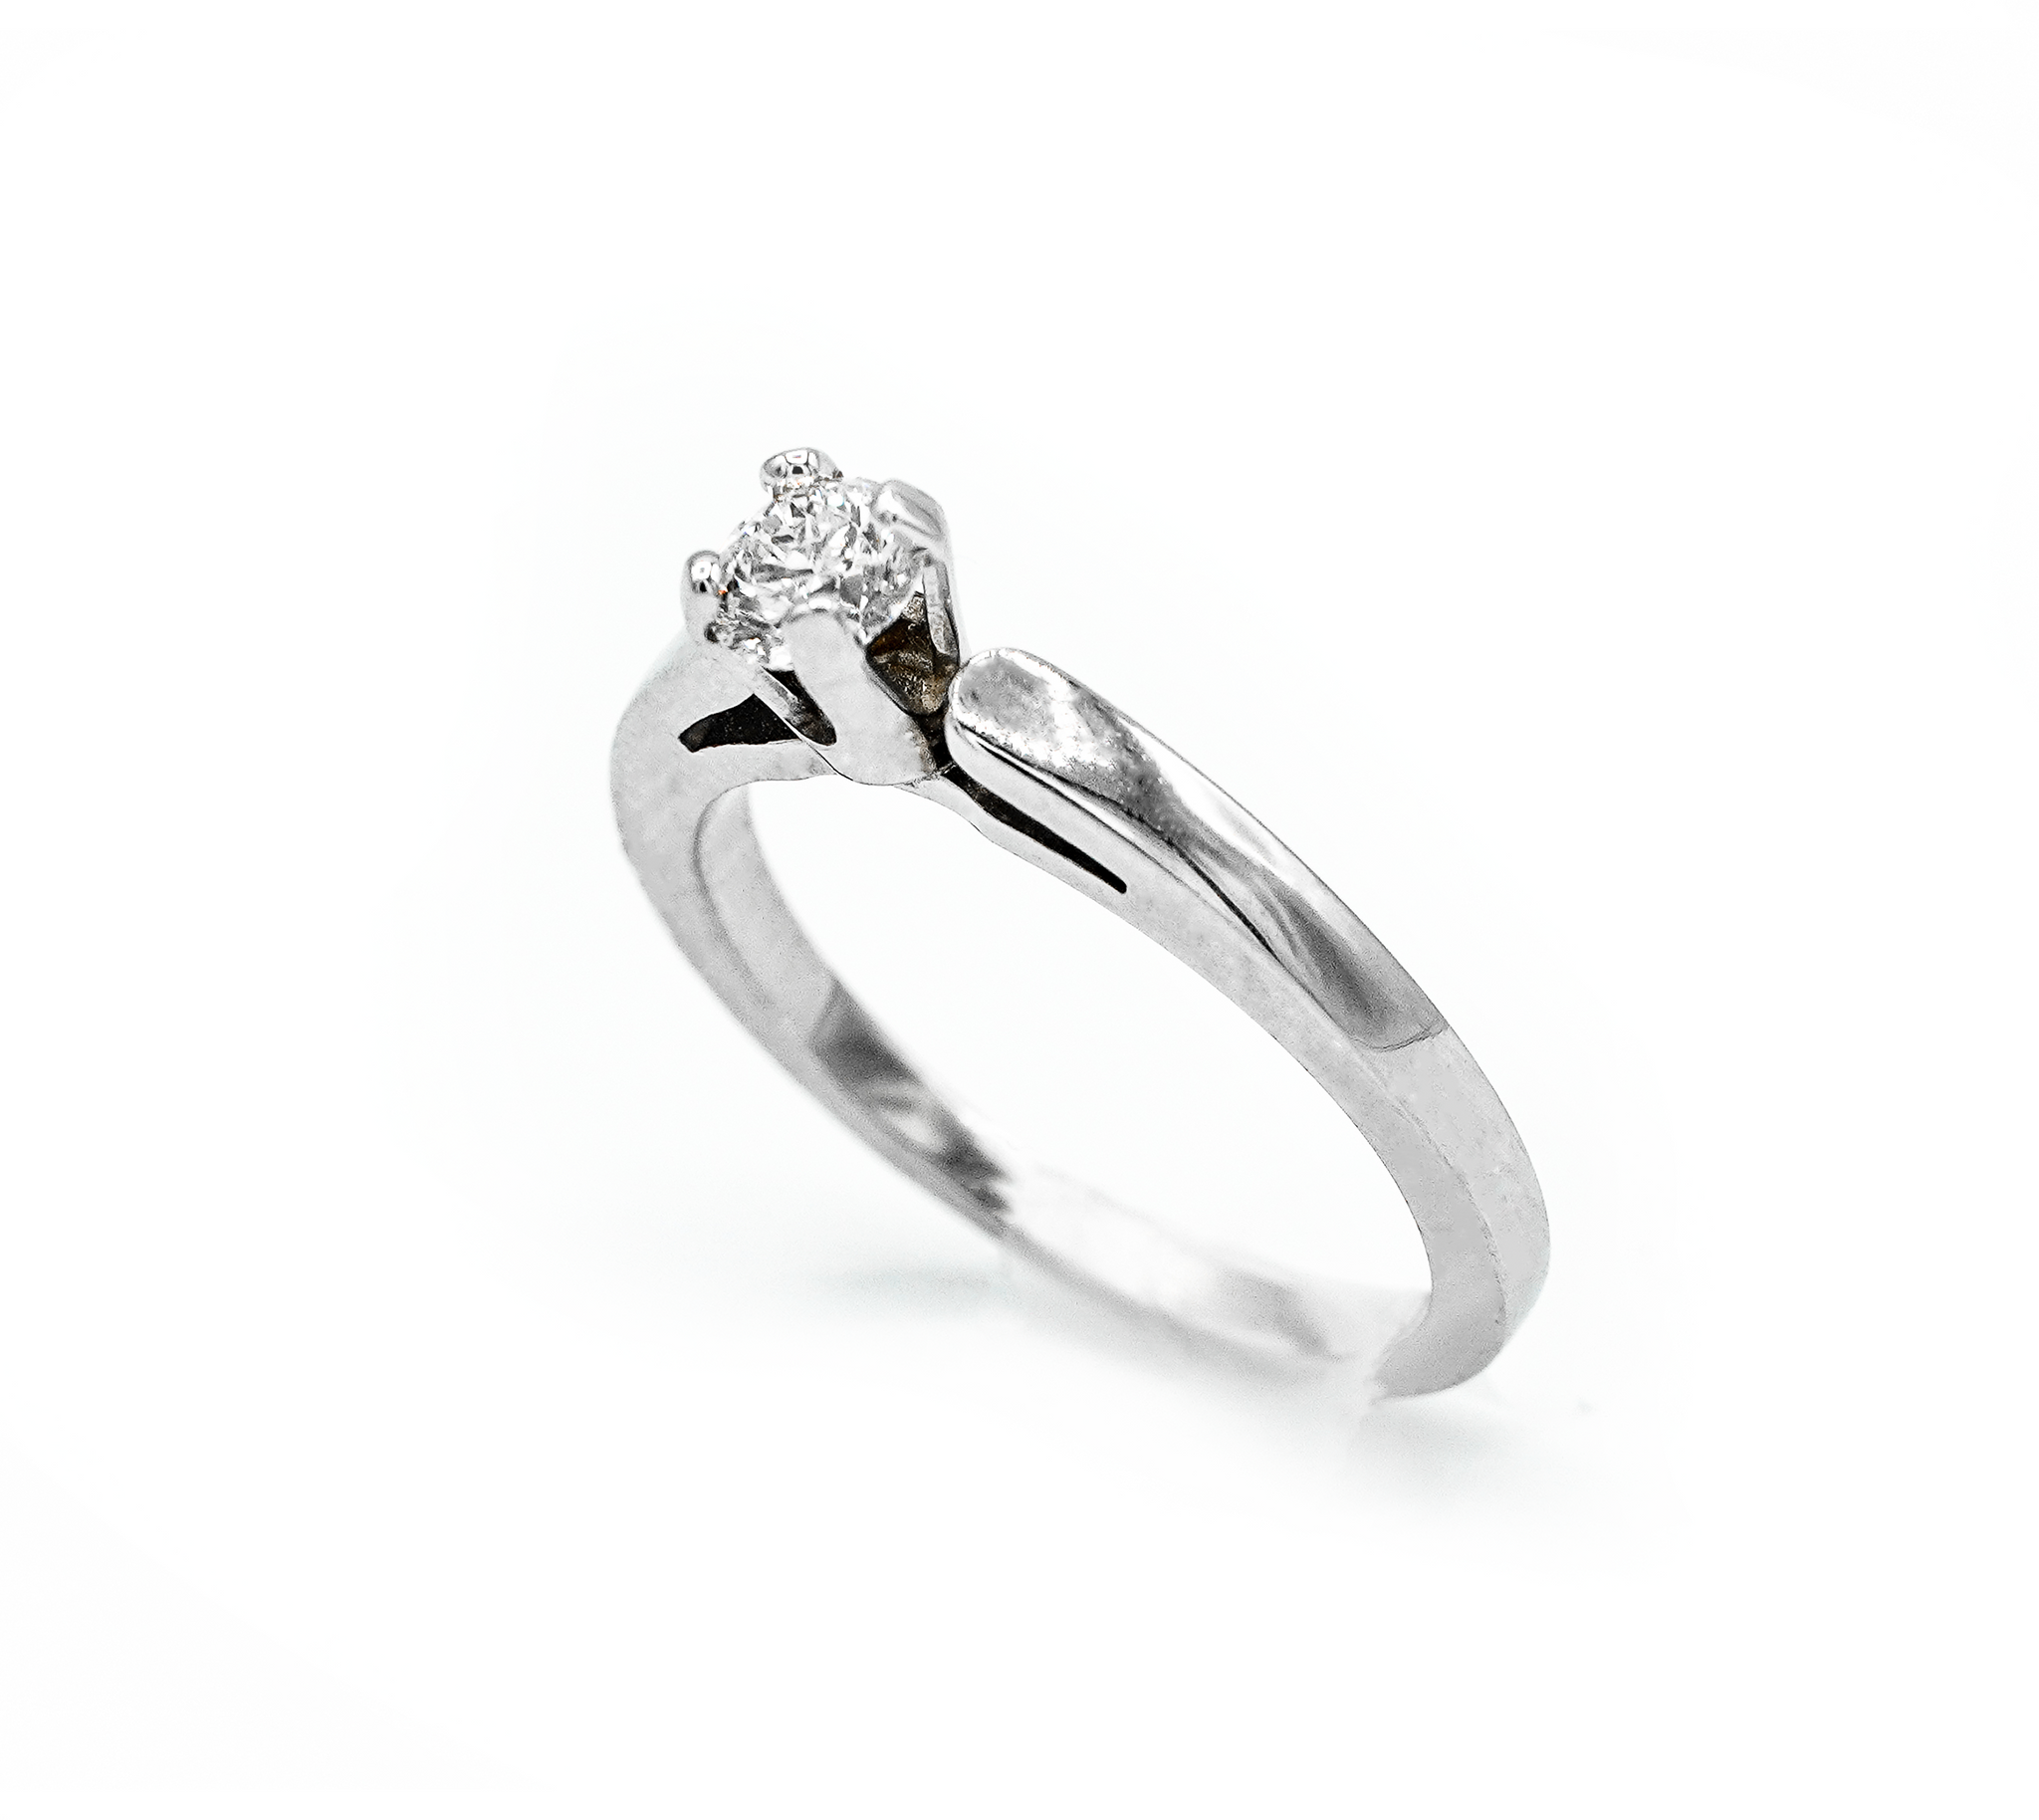 Montalvo Diamonds - Hearts & Arrows Solitaire Ring in 14kt White Gold